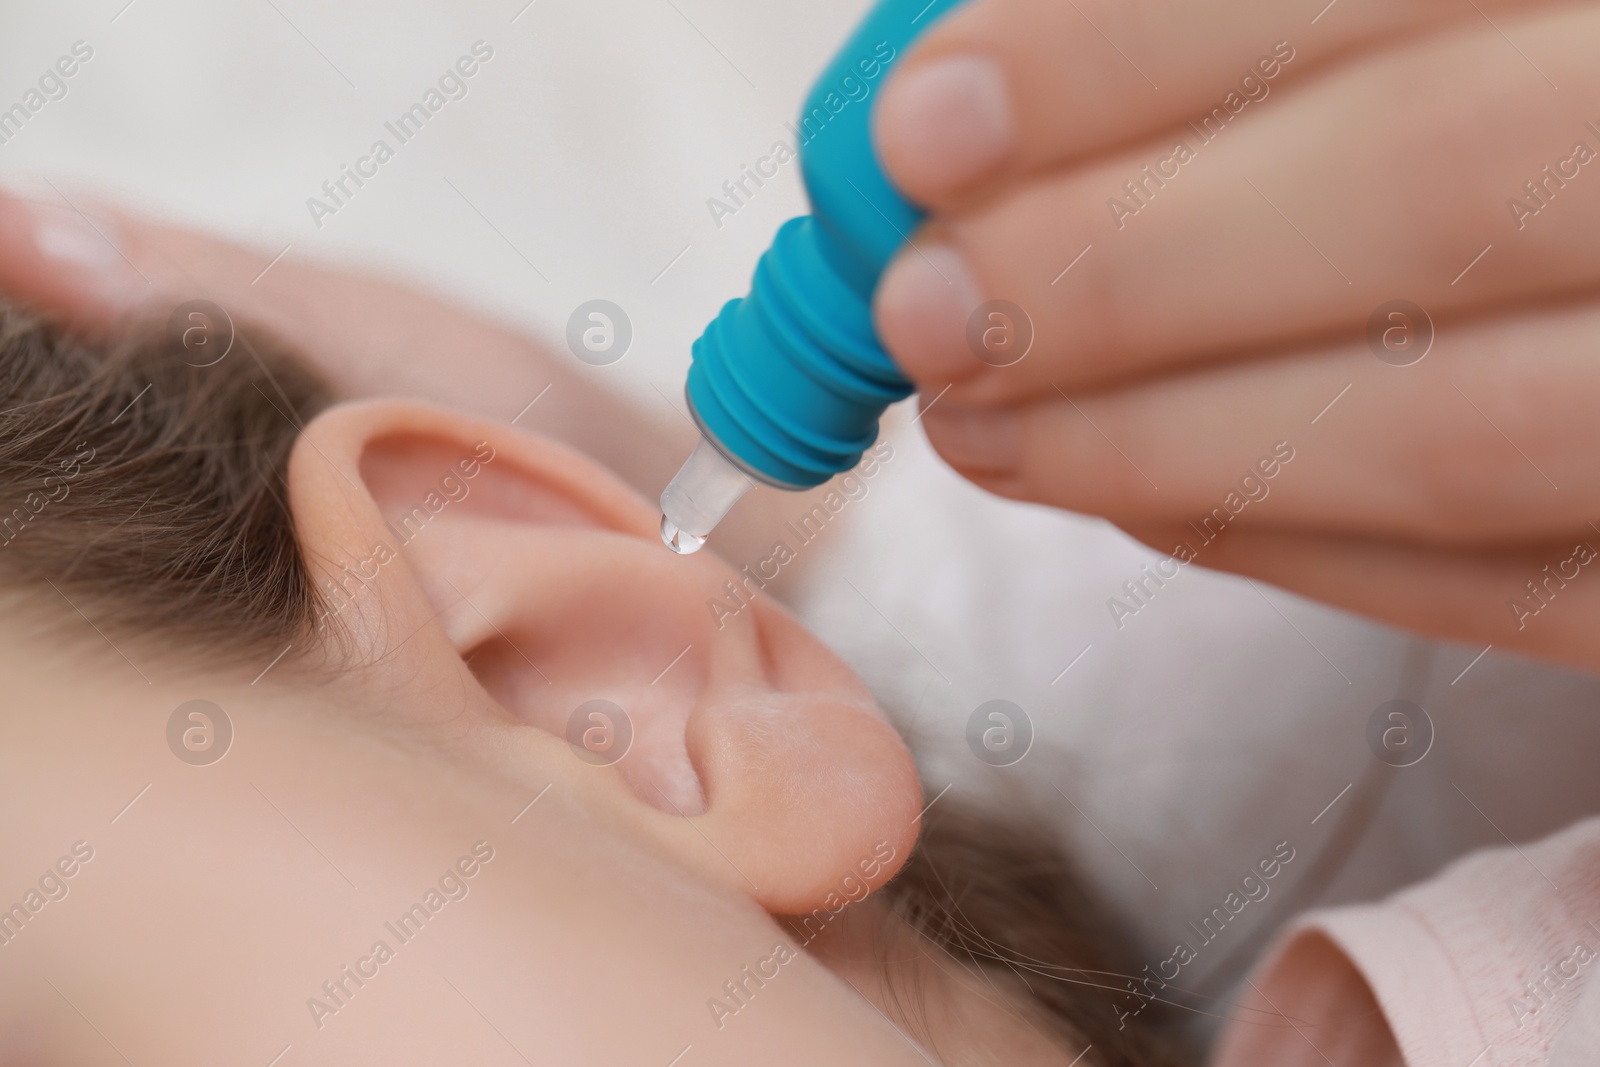 Photo of Mother dripping medication into daughter's ear on light background, closeup